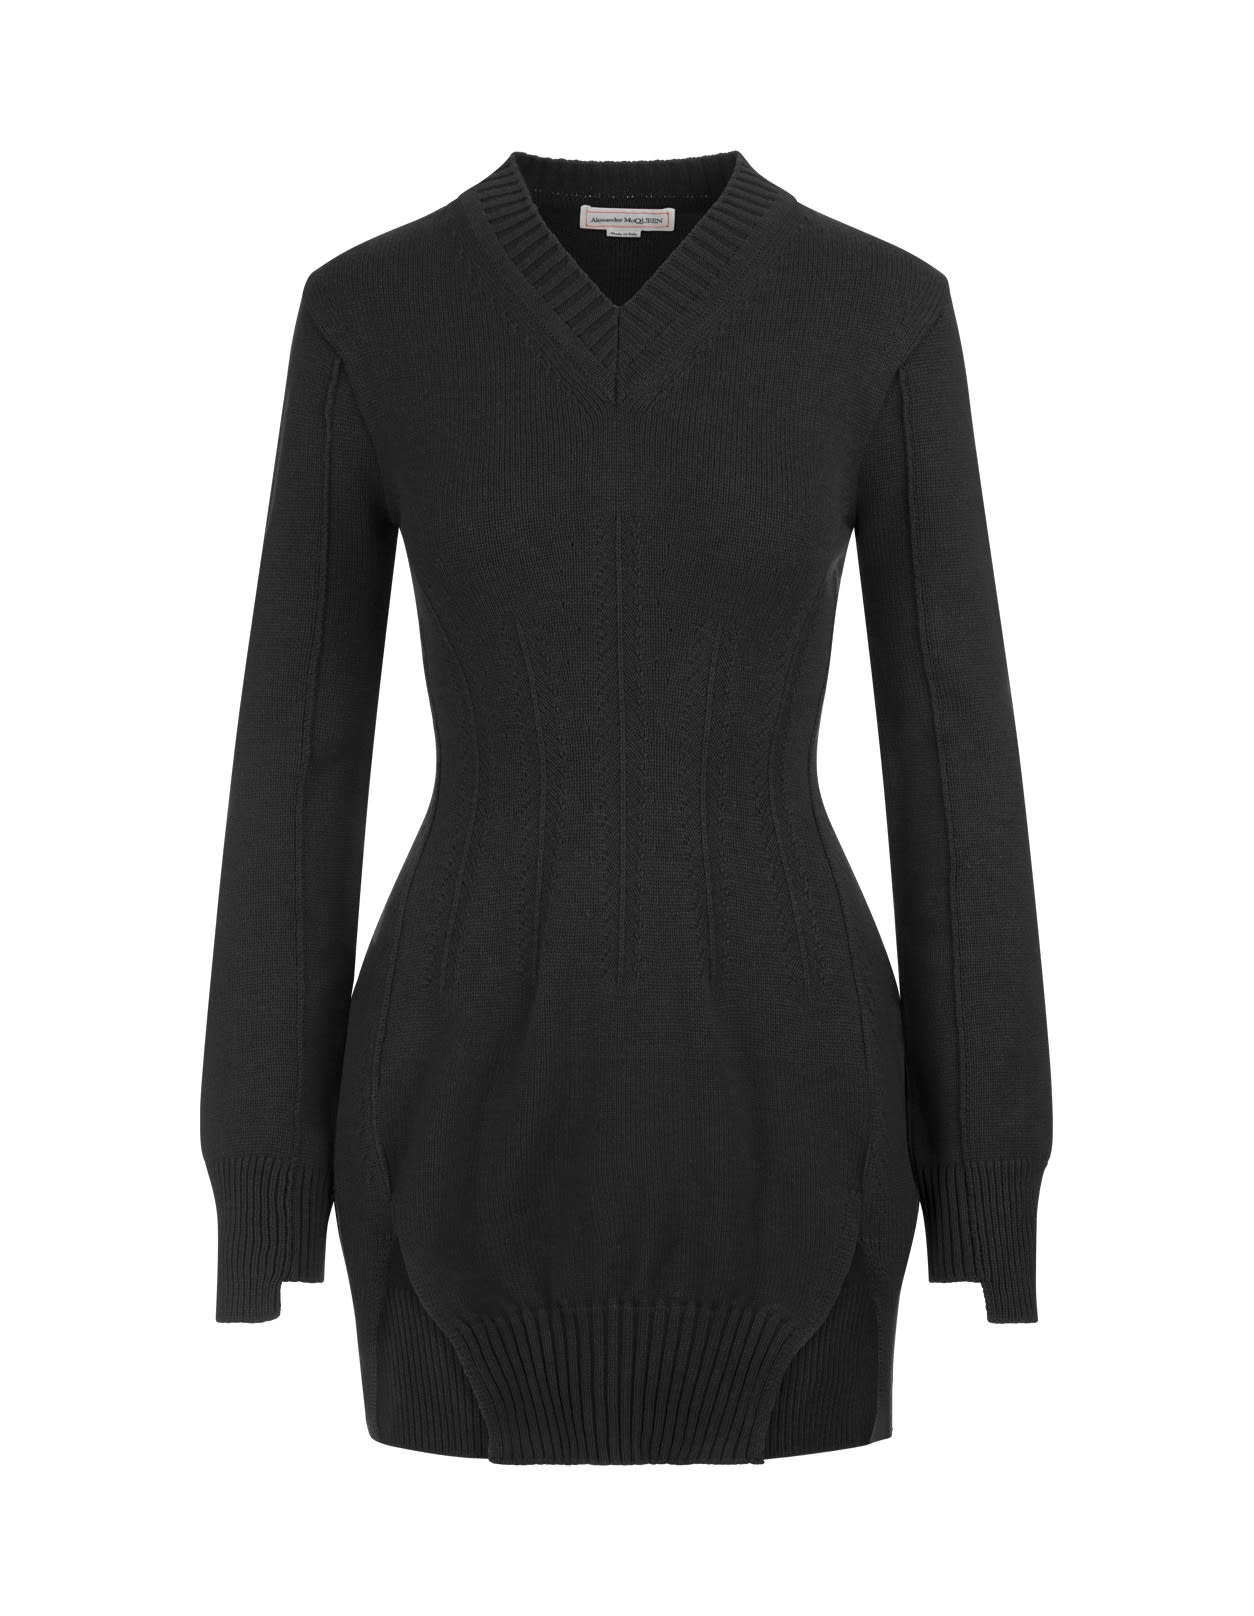 Alexander McQueen Black Cashmere Tunic Sweater With Corset Stitching